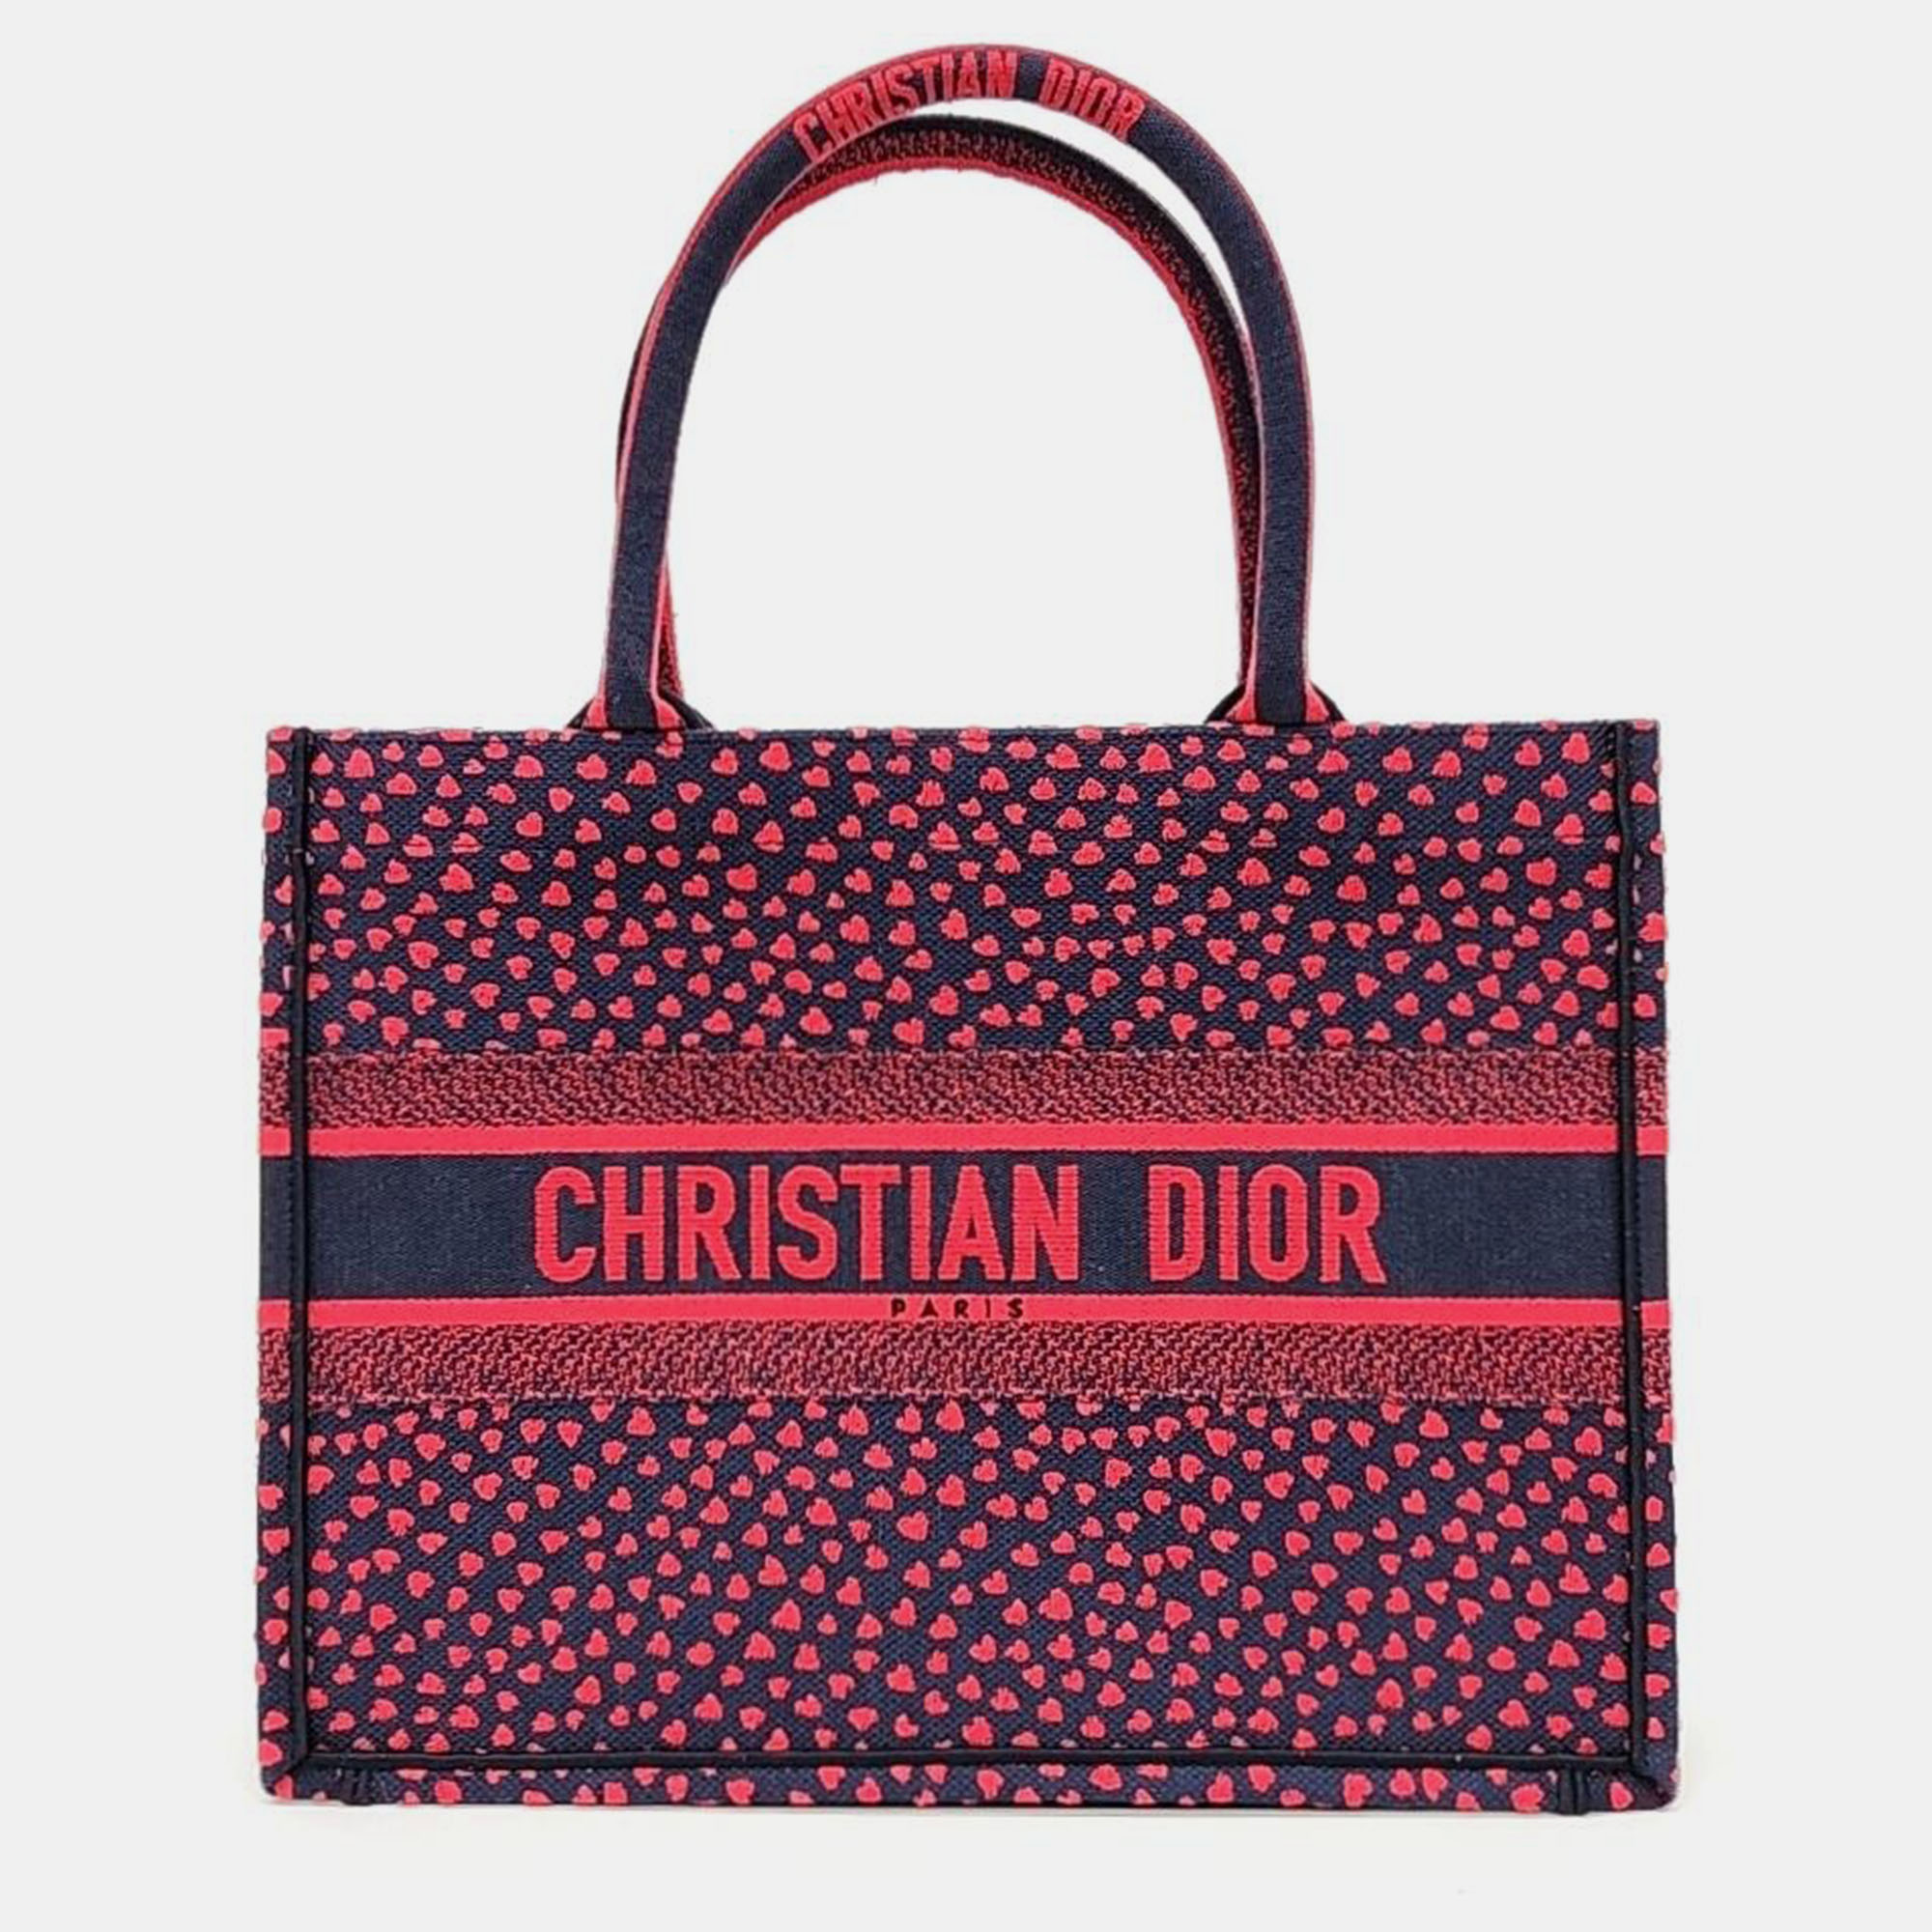 Christian dior red canvas book tote bag